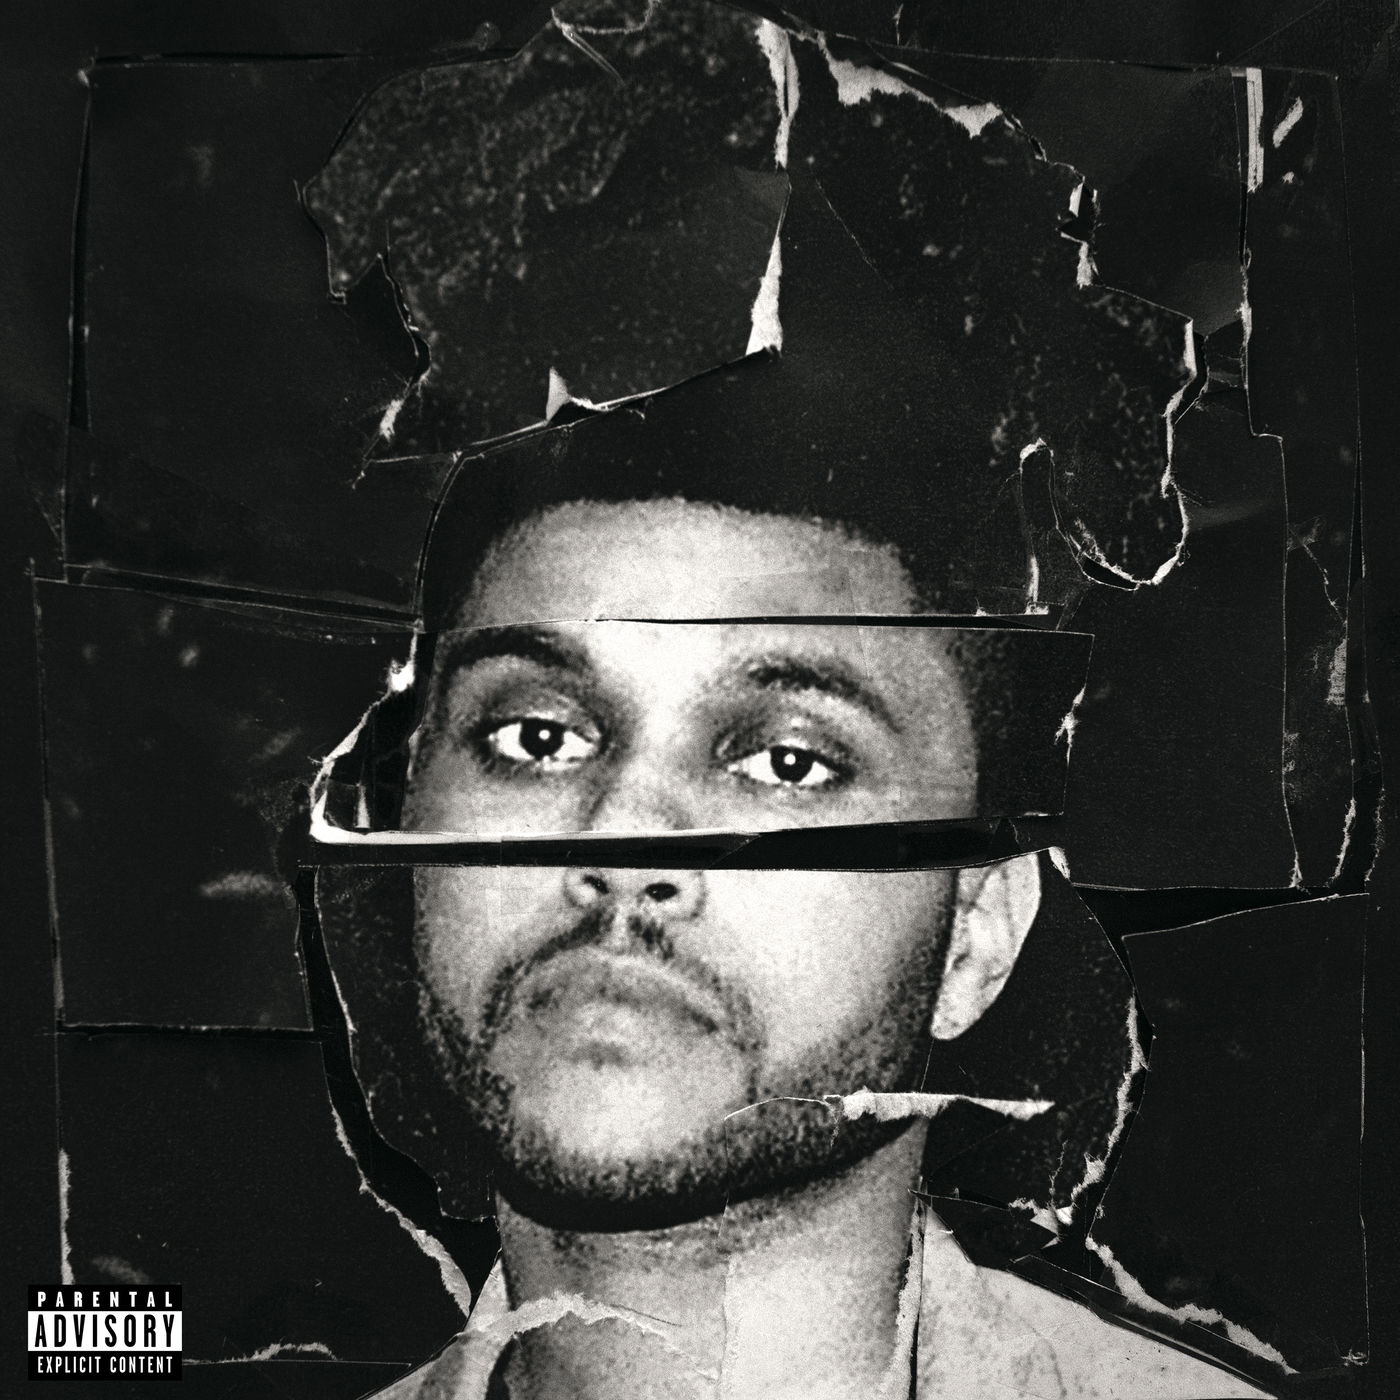 The Weeknd – Beauty Behind The Madness (Explicit Version)Ⓔ【44.1kHz／24bit】美国区-OppsUpro音乐帝国